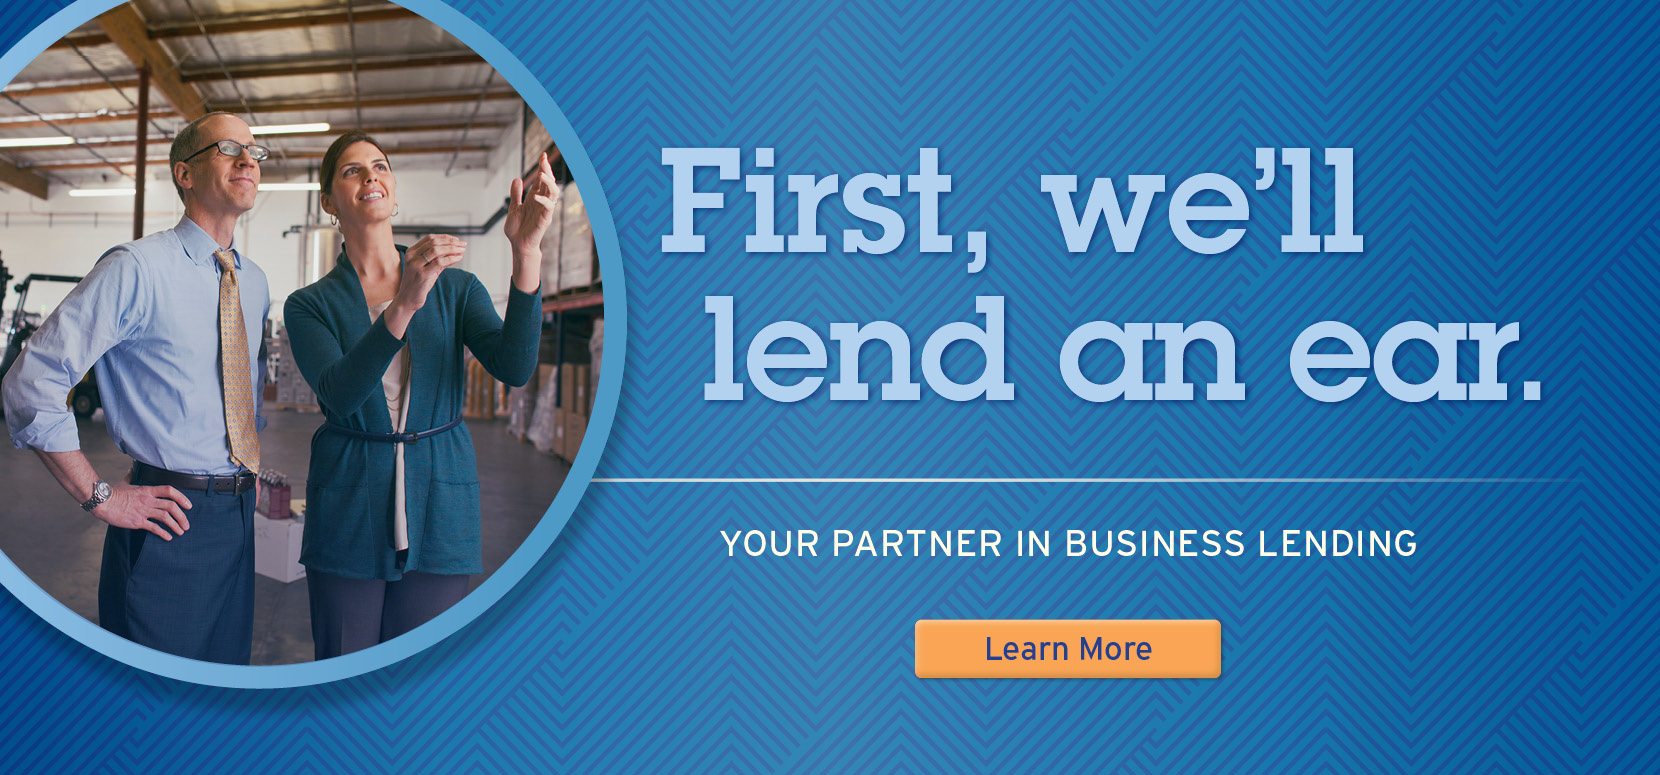 First we'll lend an ear. Click to learn more about business loans